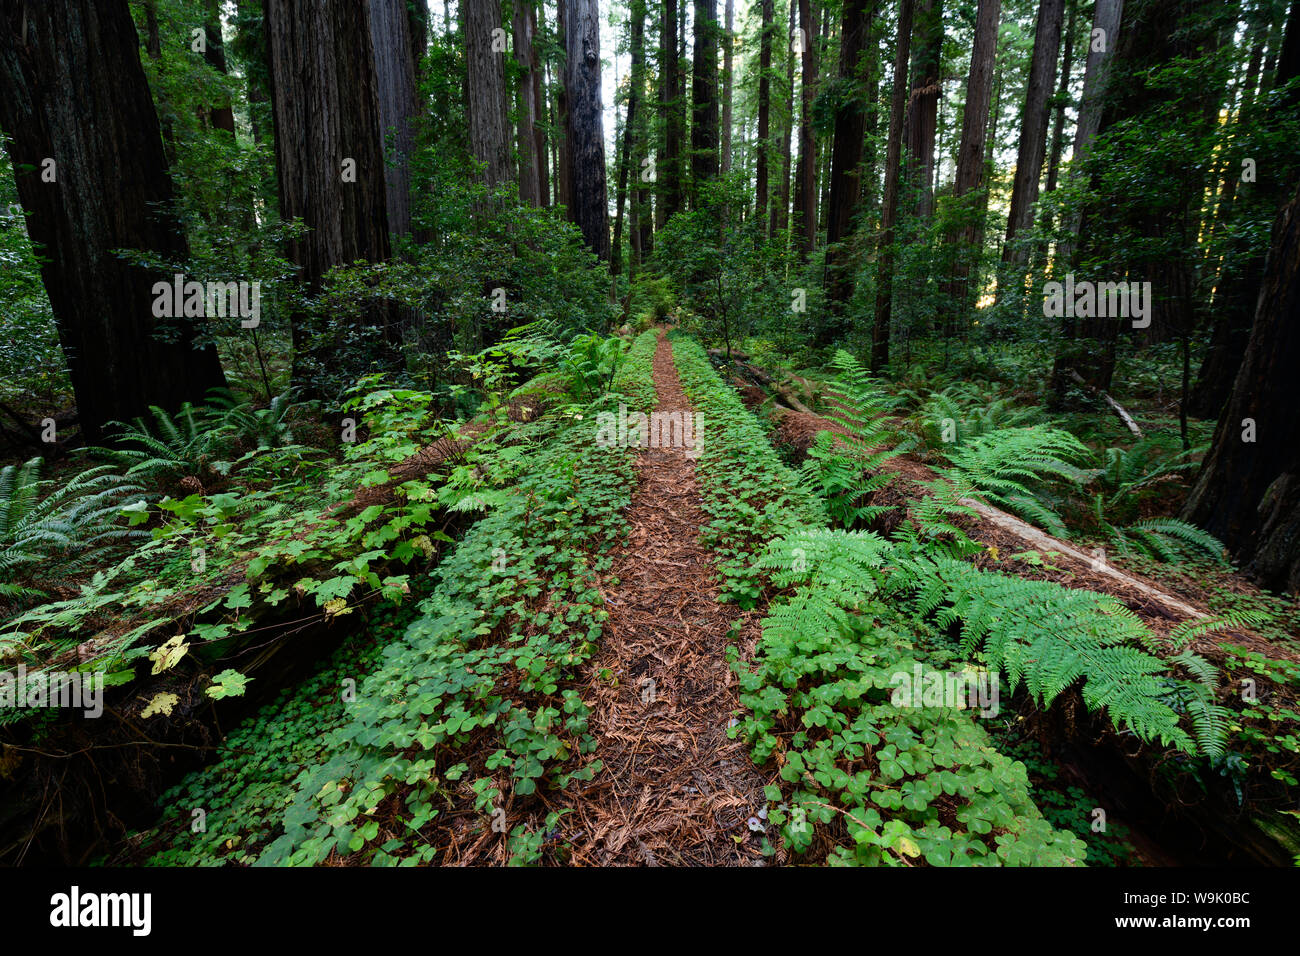 The Cheatham Grove of ancient redwood trees near Crescent City, California is where the speeder chase scenes from Return of the Jedi were filmed. One Stock Photo